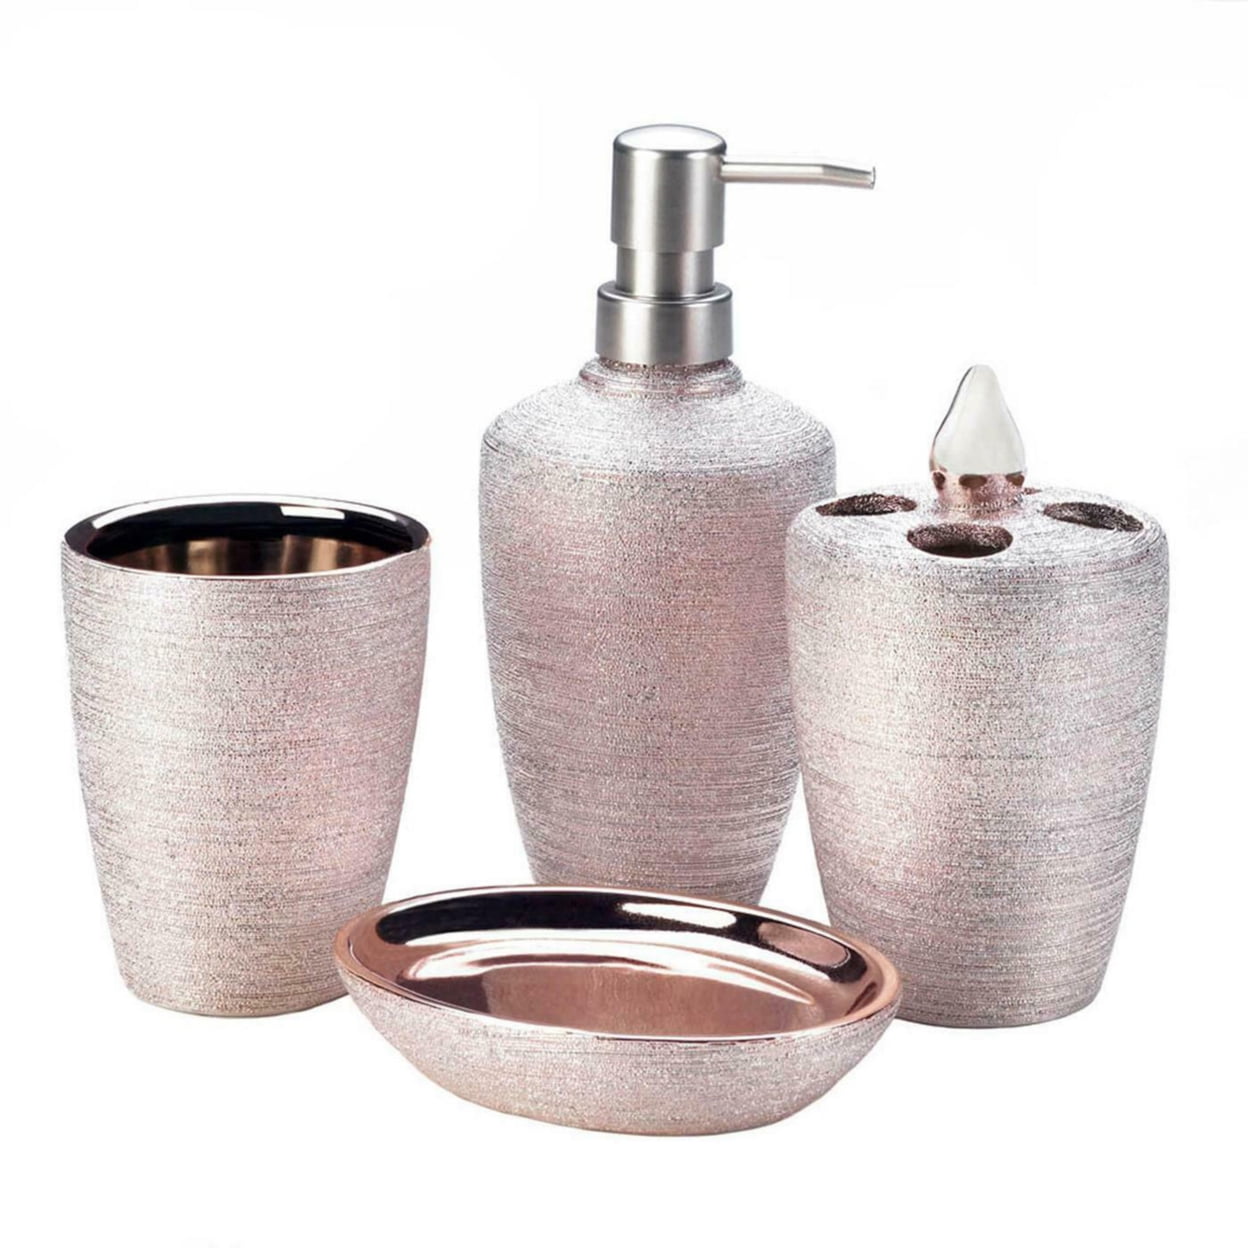 Picture of Accent Plus 10018332 Rose Gold Shimmering Bath Set